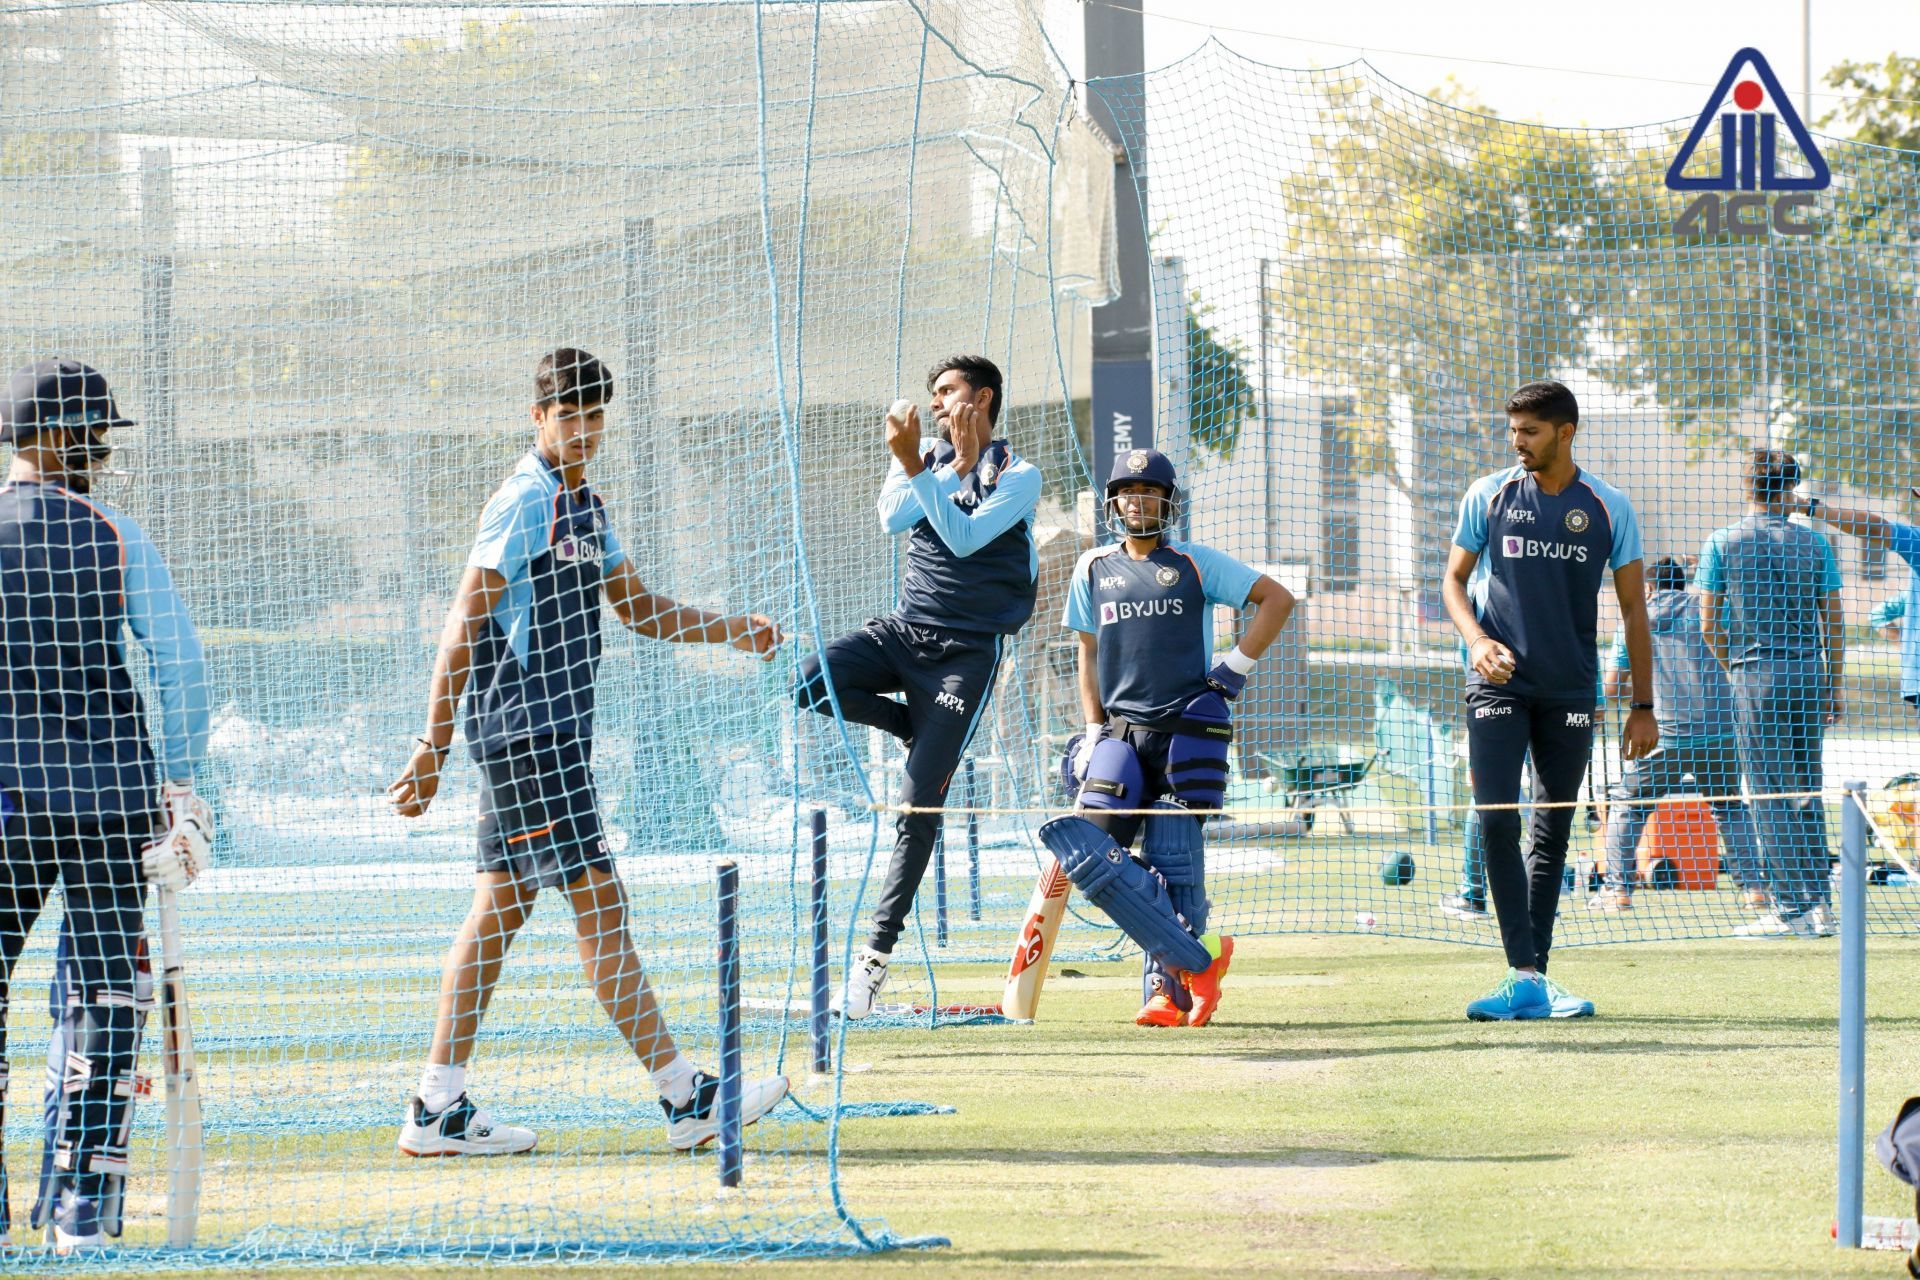 India U-19 players practice at the nets ahead of the Asia Cup in the UAE. (PC: Asian Cricket Council)